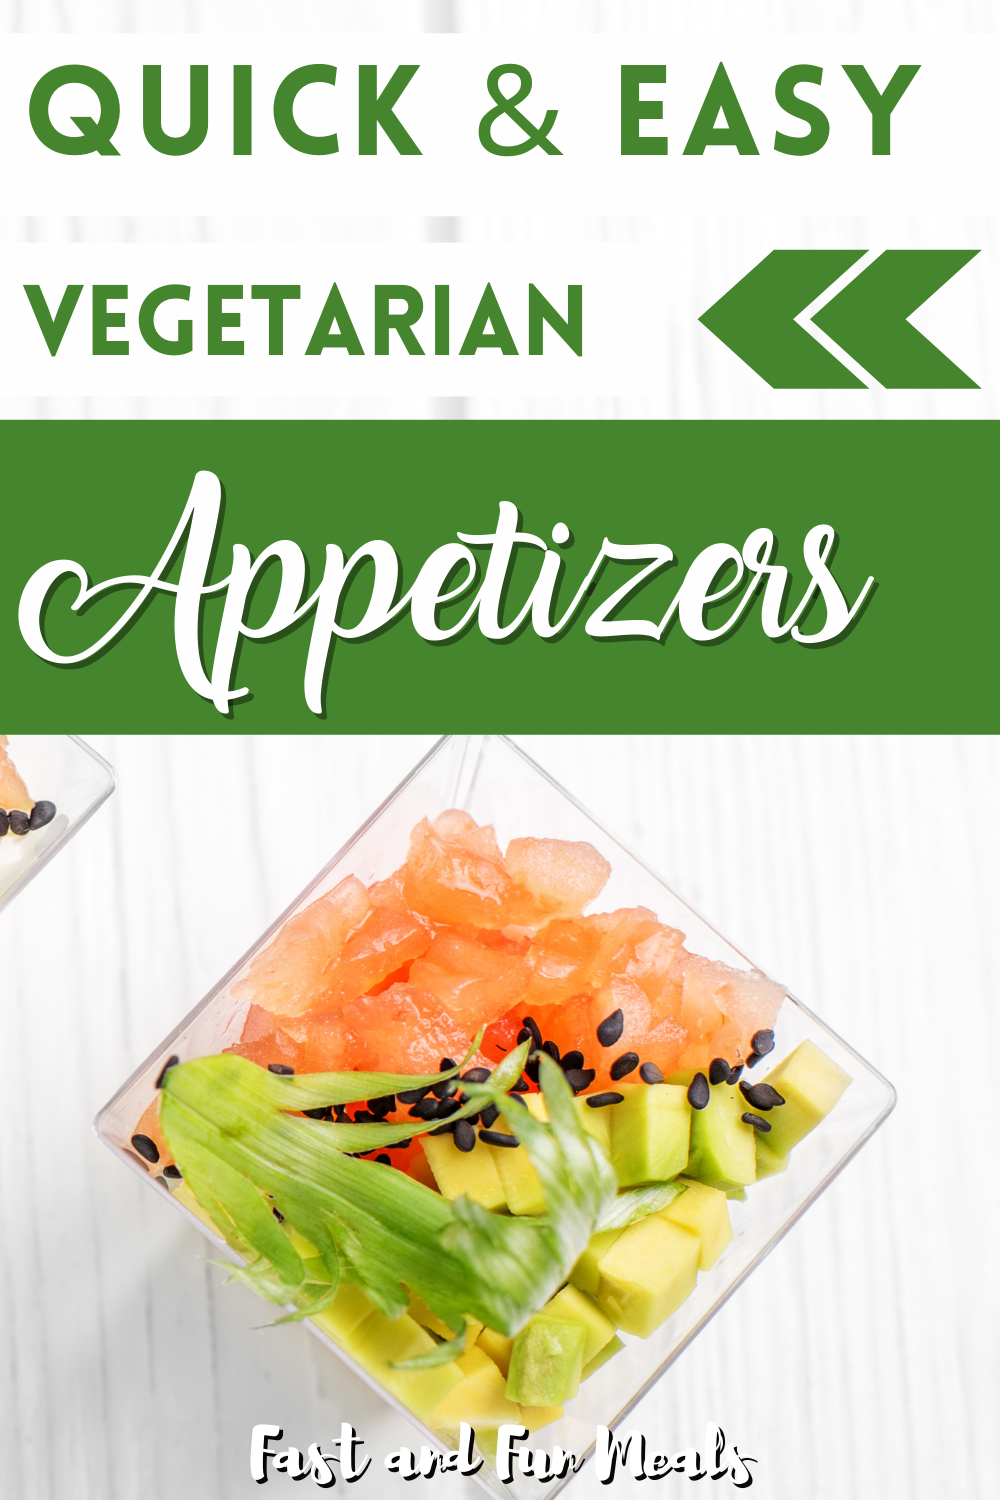 Pin showing the title Quick and Easy Vegetarian Appetizers